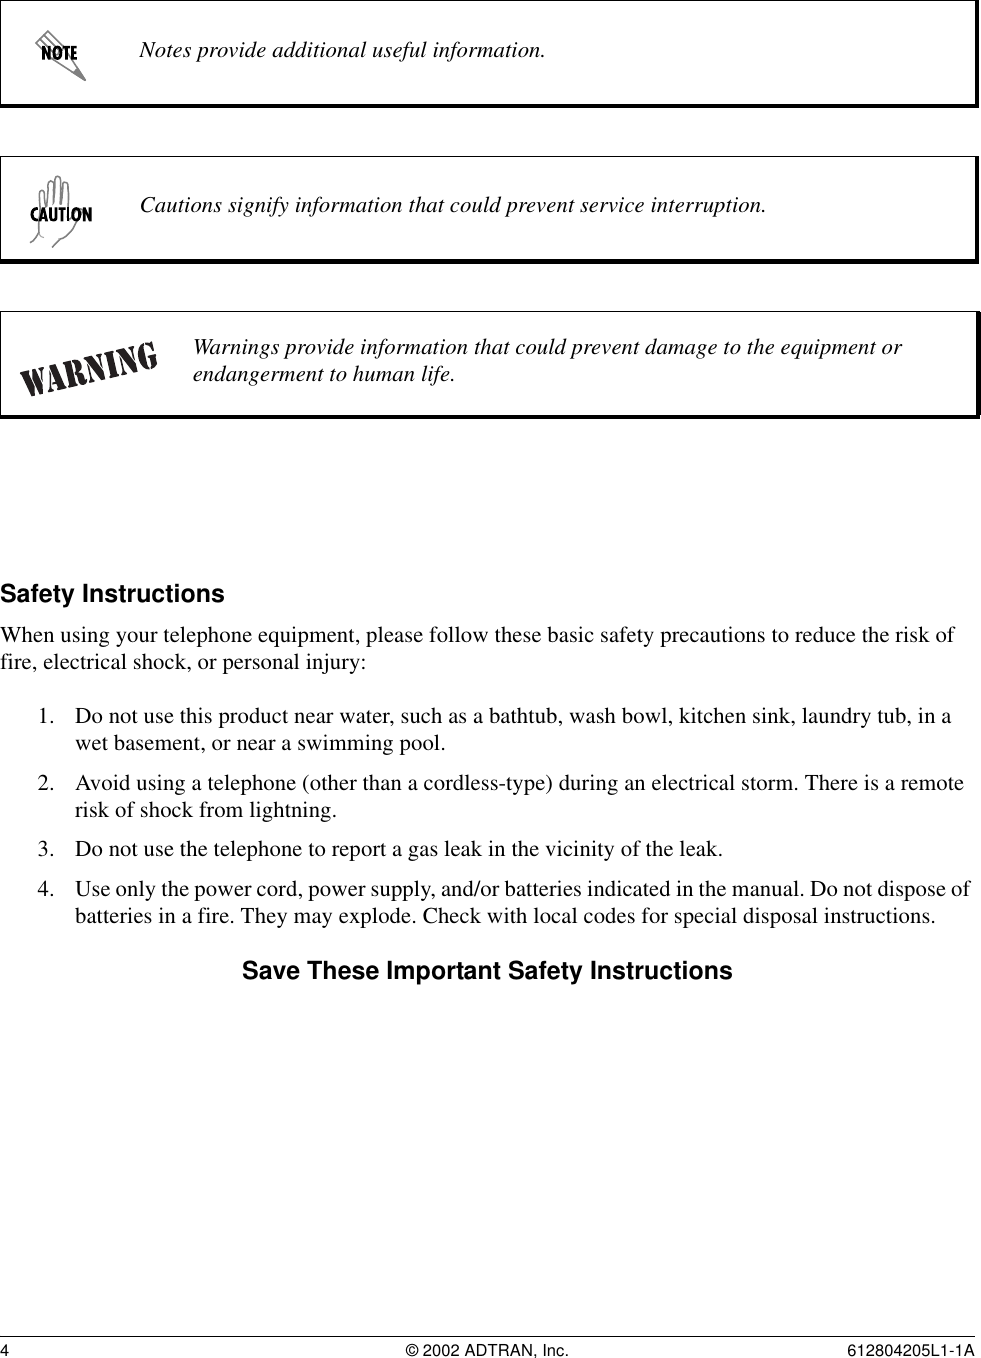 4 © 2002 ADTRAN, Inc. 612804205L1-1ASafety InstructionsWhen using your telephone equipment, please follow these basic safety precautions to reduce the risk of fire, electrical shock, or personal injury:1. Do not use this product near water, such as a bathtub, wash bowl, kitchen sink, laundry tub, in a wet basement, or near a swimming pool.2. Avoid using a telephone (other than a cordless-type) during an electrical storm. There is a remote risk of shock from lightning.3. Do not use the telephone to report a gas leak in the vicinity of the leak.4. Use only the power cord, power supply, and/or batteries indicated in the manual. Do not dispose of batteries in a fire. They may explode. Check with local codes for special disposal instructions.Save These Important Safety InstructionsNotes provide additional useful information.Cautions signify information that could prevent service interruption.Warnings provide information that could prevent damage to the equipment or endangerment to human life.